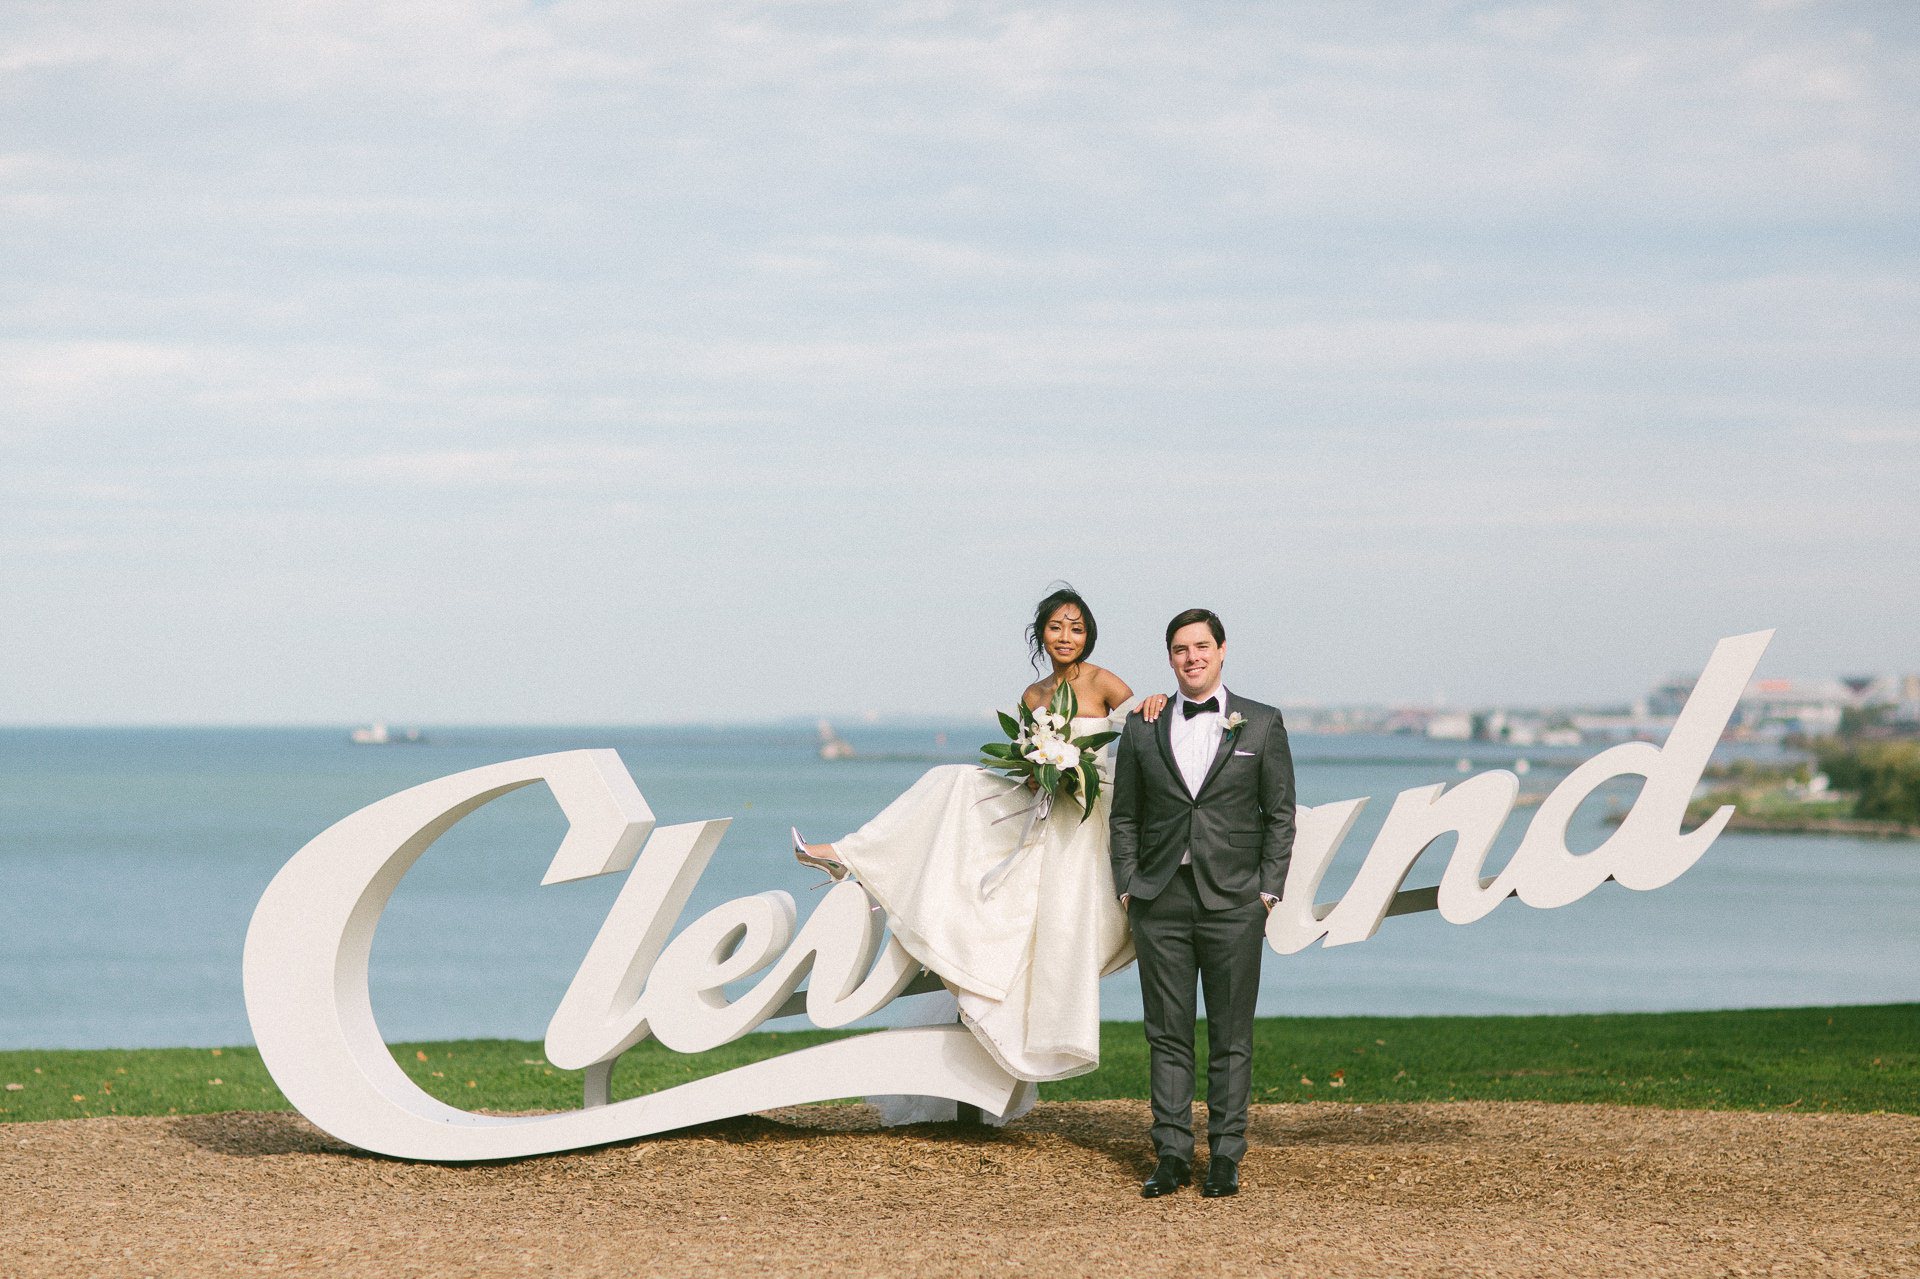 Wedding at Ernst and Young Rooftop in Downtown Cleveland 1 46.jpg